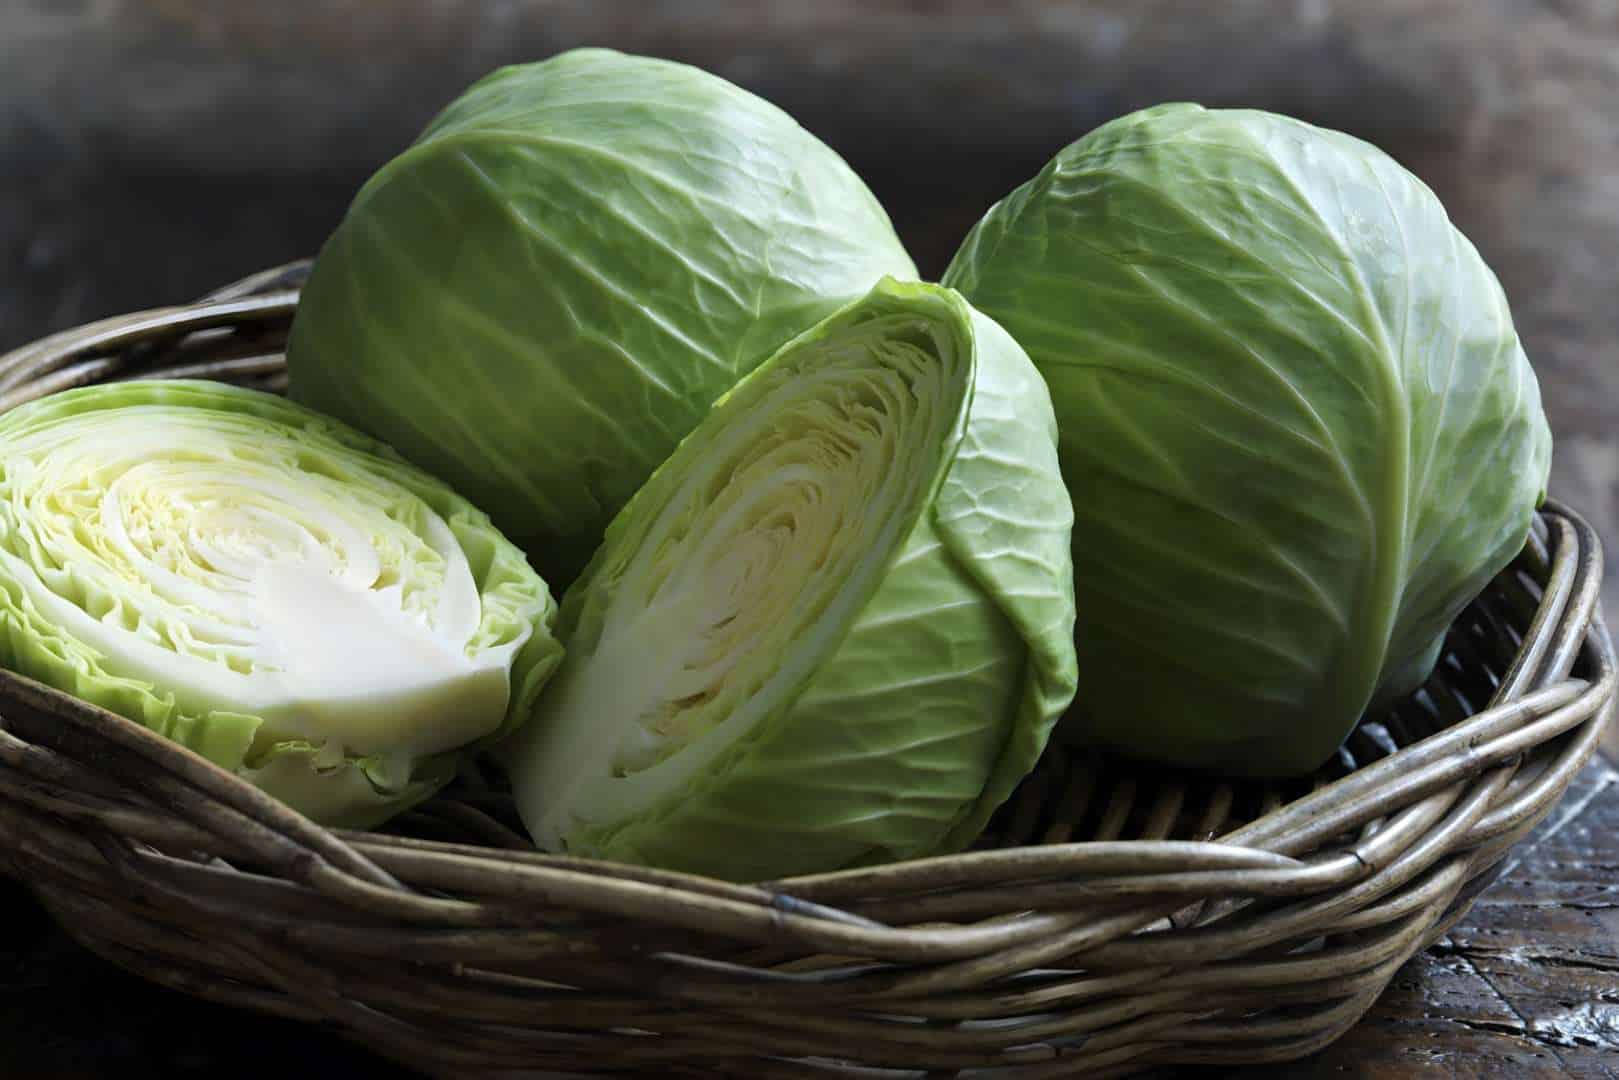 Nutritional Value of Cabbages